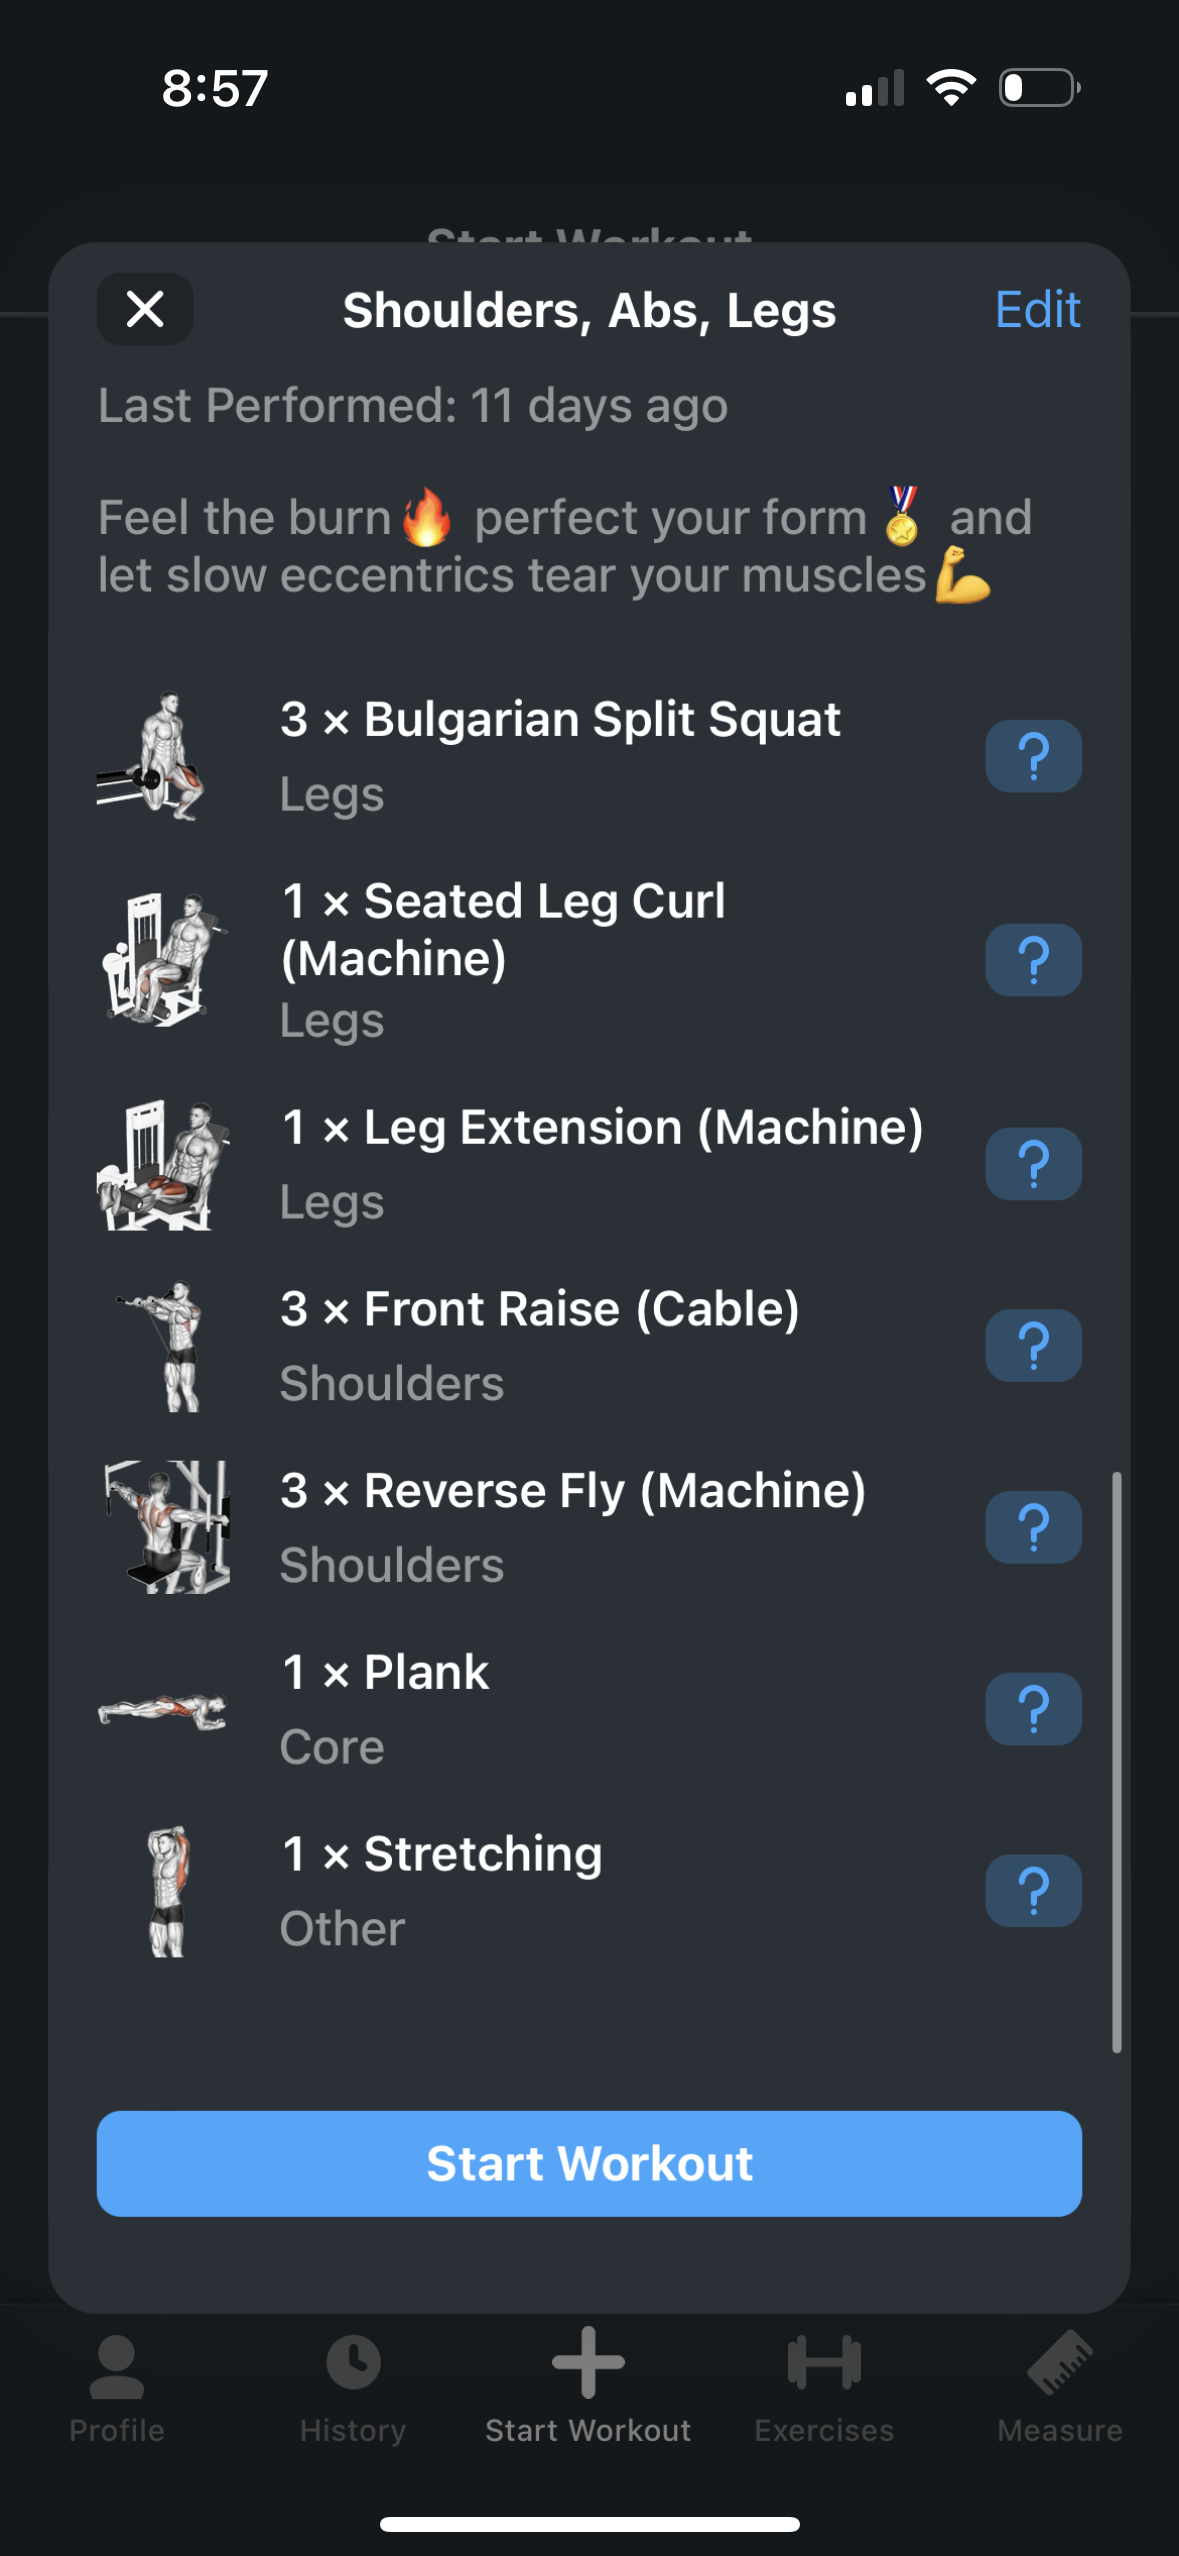 Guide for building beginner strength workouts